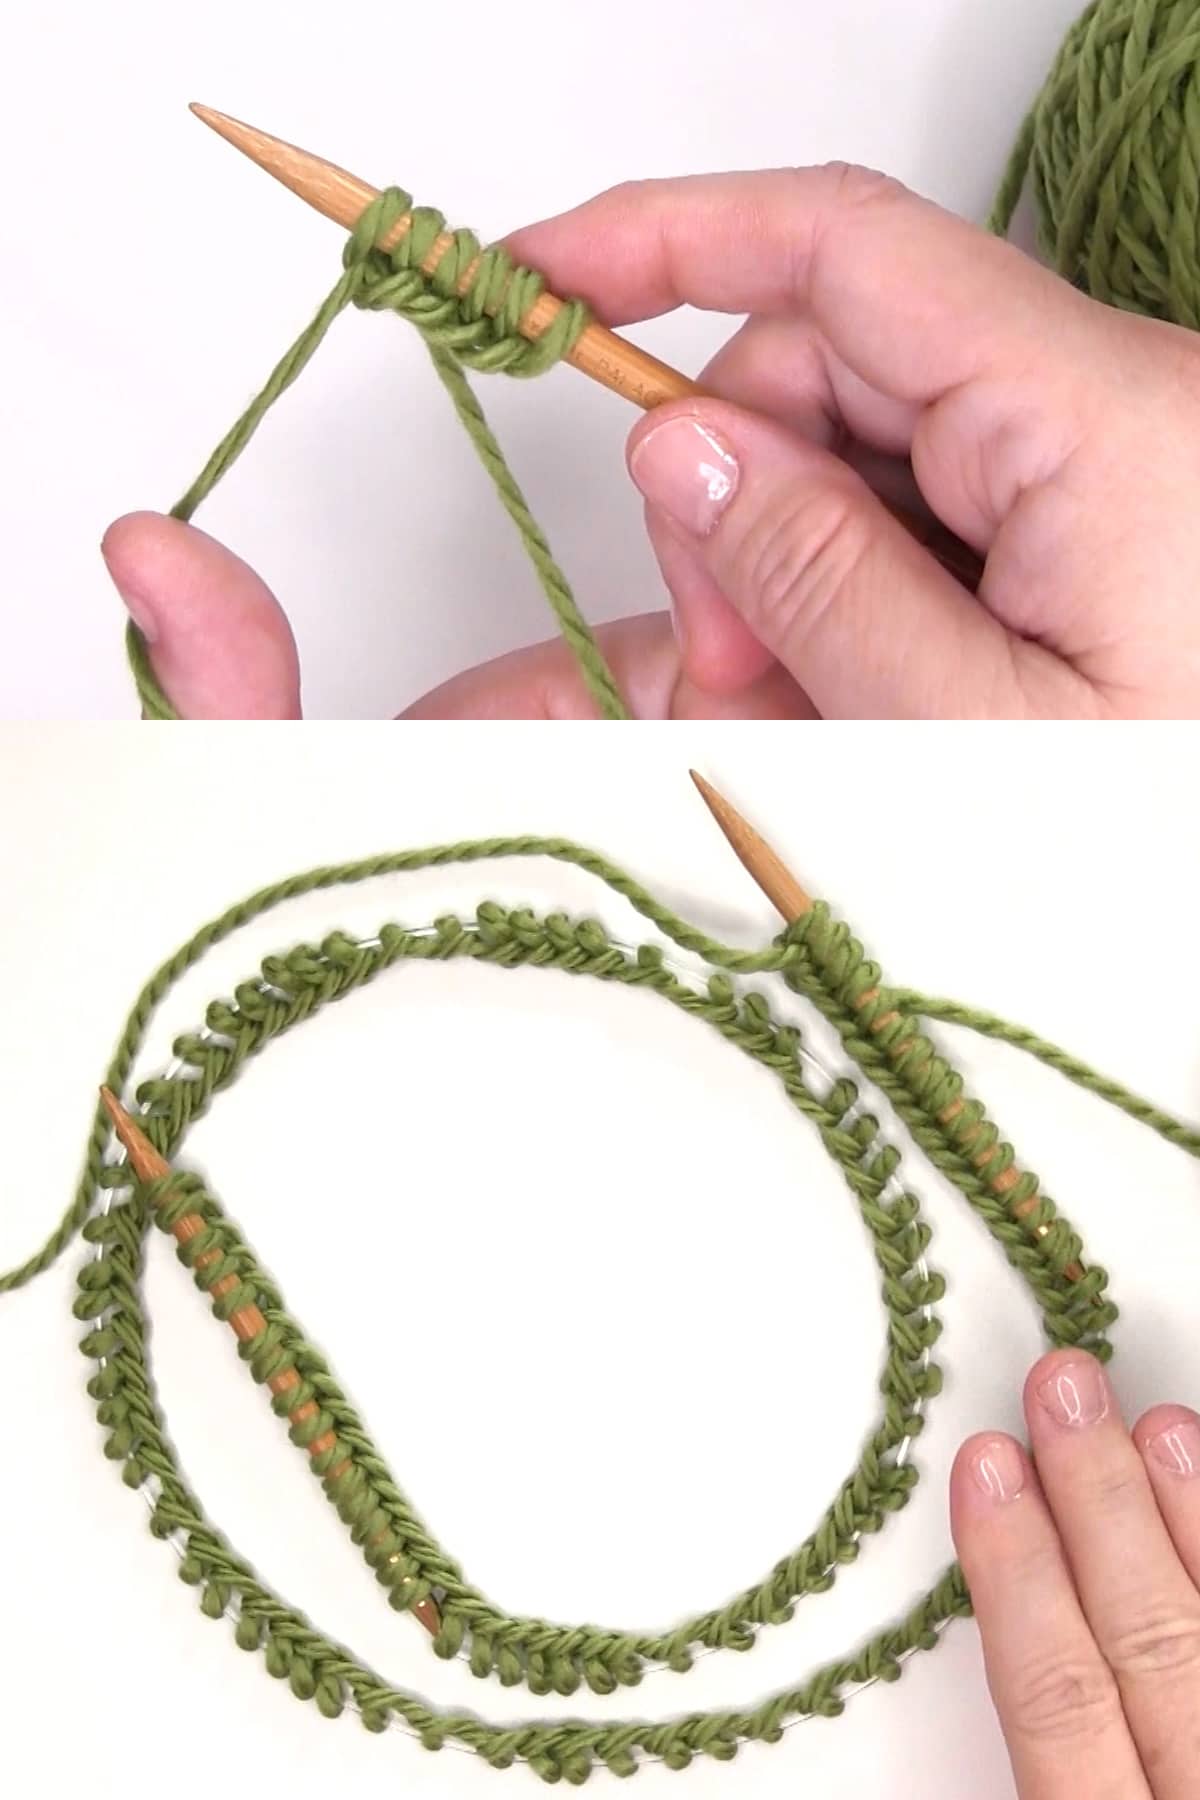 Casting on knitting stitches onto a circular needle with green yarn.